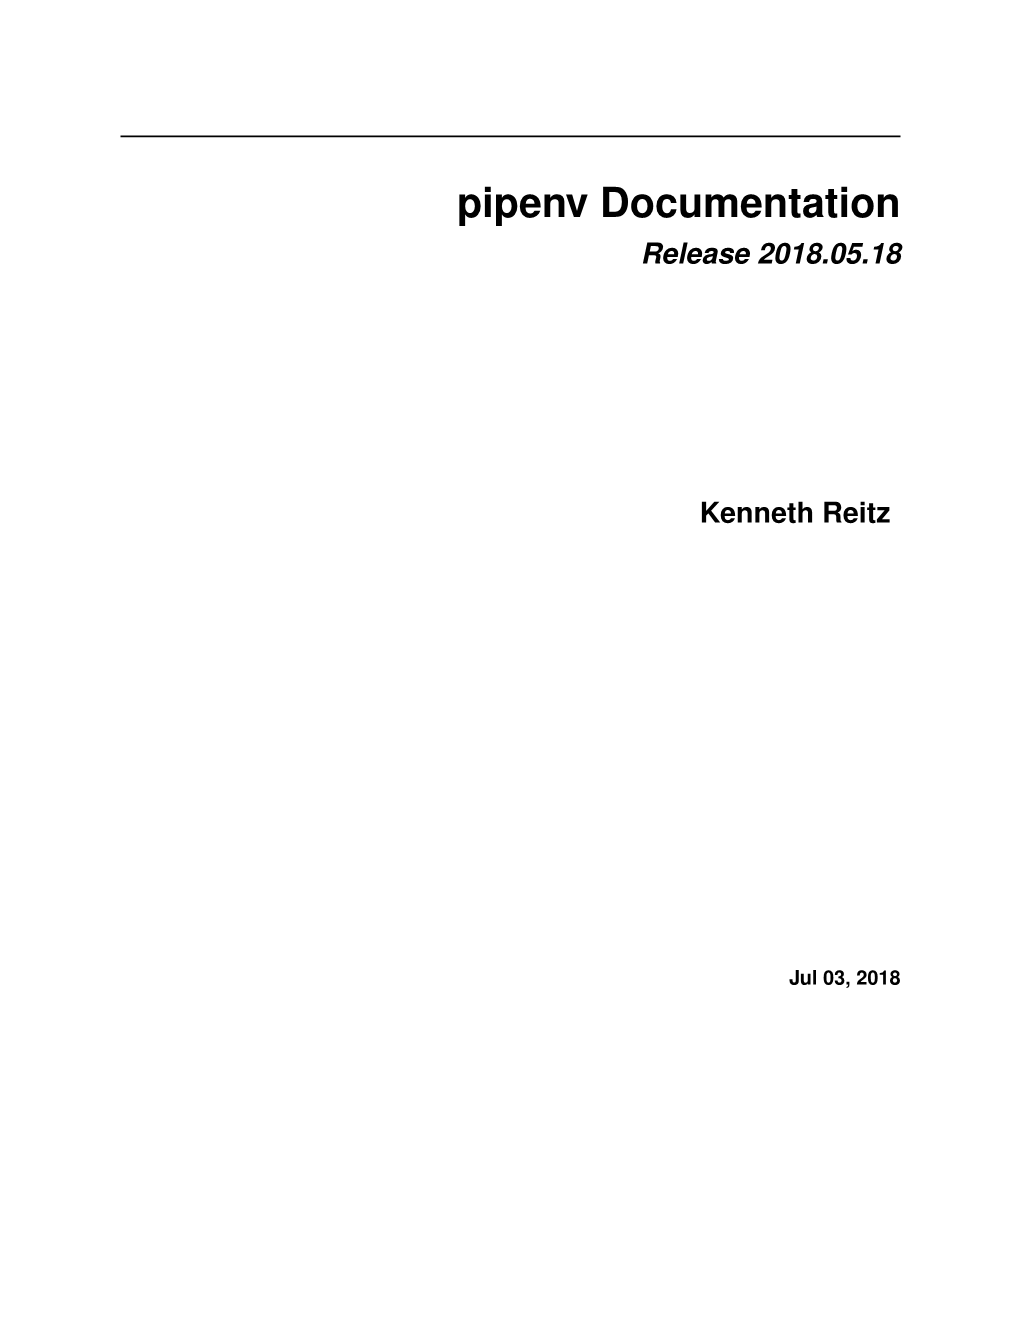 Pipenv Documentation Release 2018.05.18